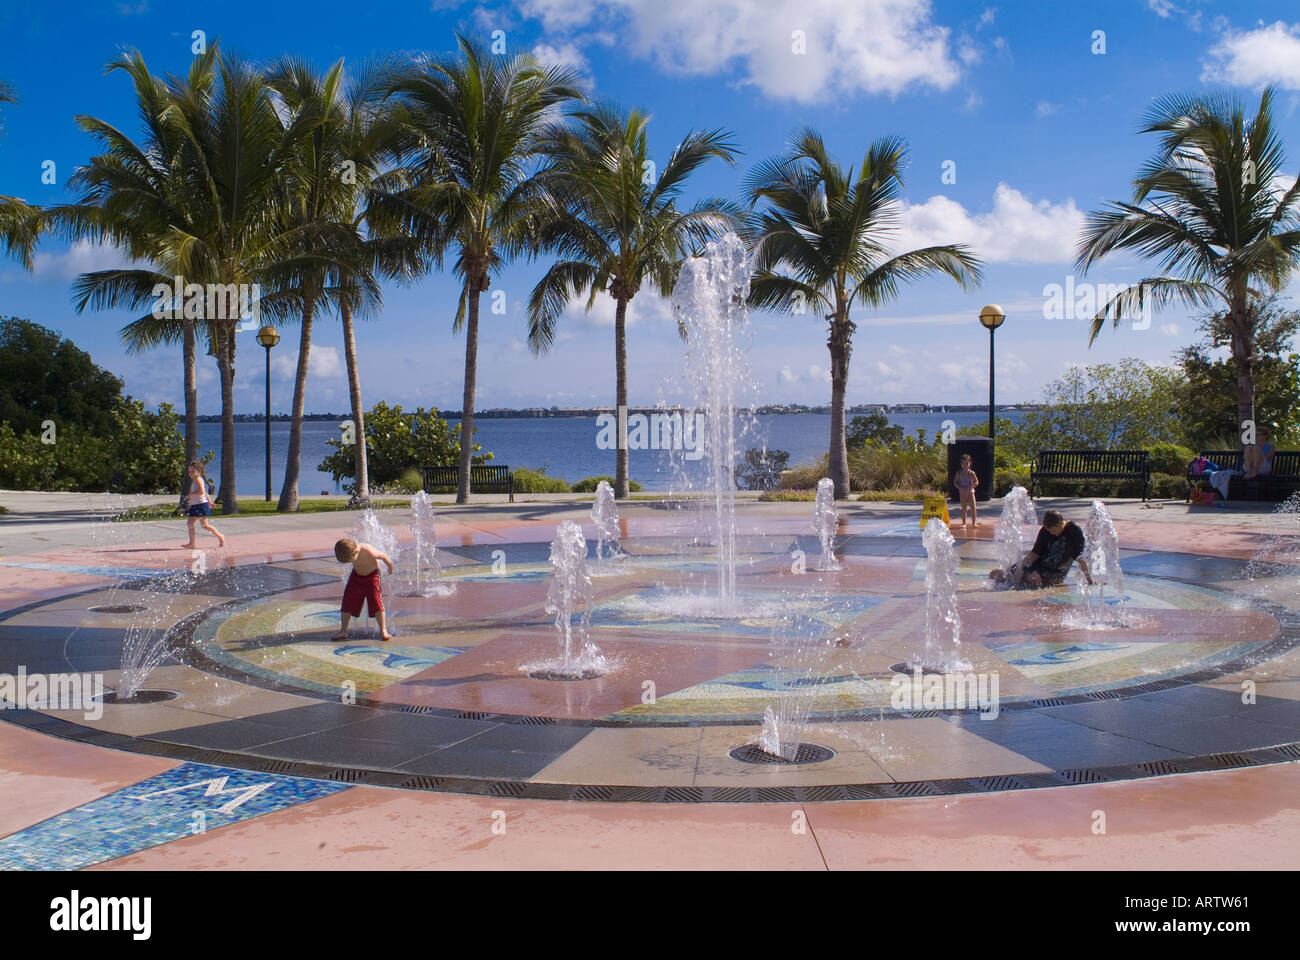 children playing in water fountain at a Florida park cooling off recreation fun wet fountains palm trees Stock Photo